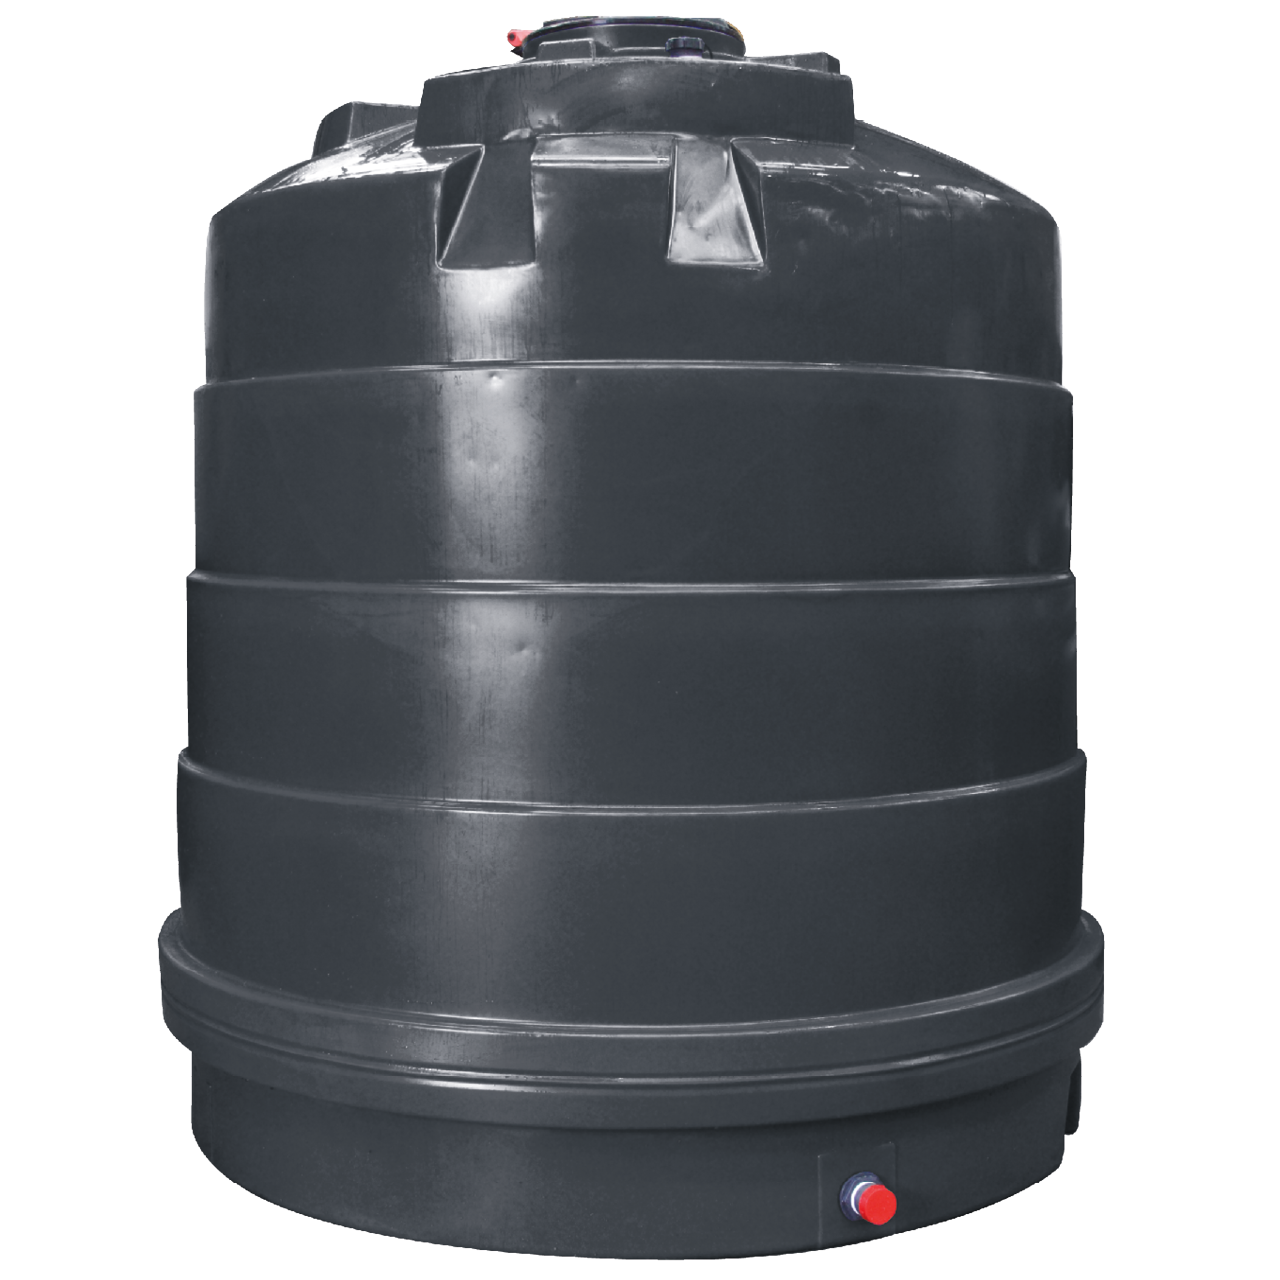 An Introduction to Industrial Hot Water Storage Tanks